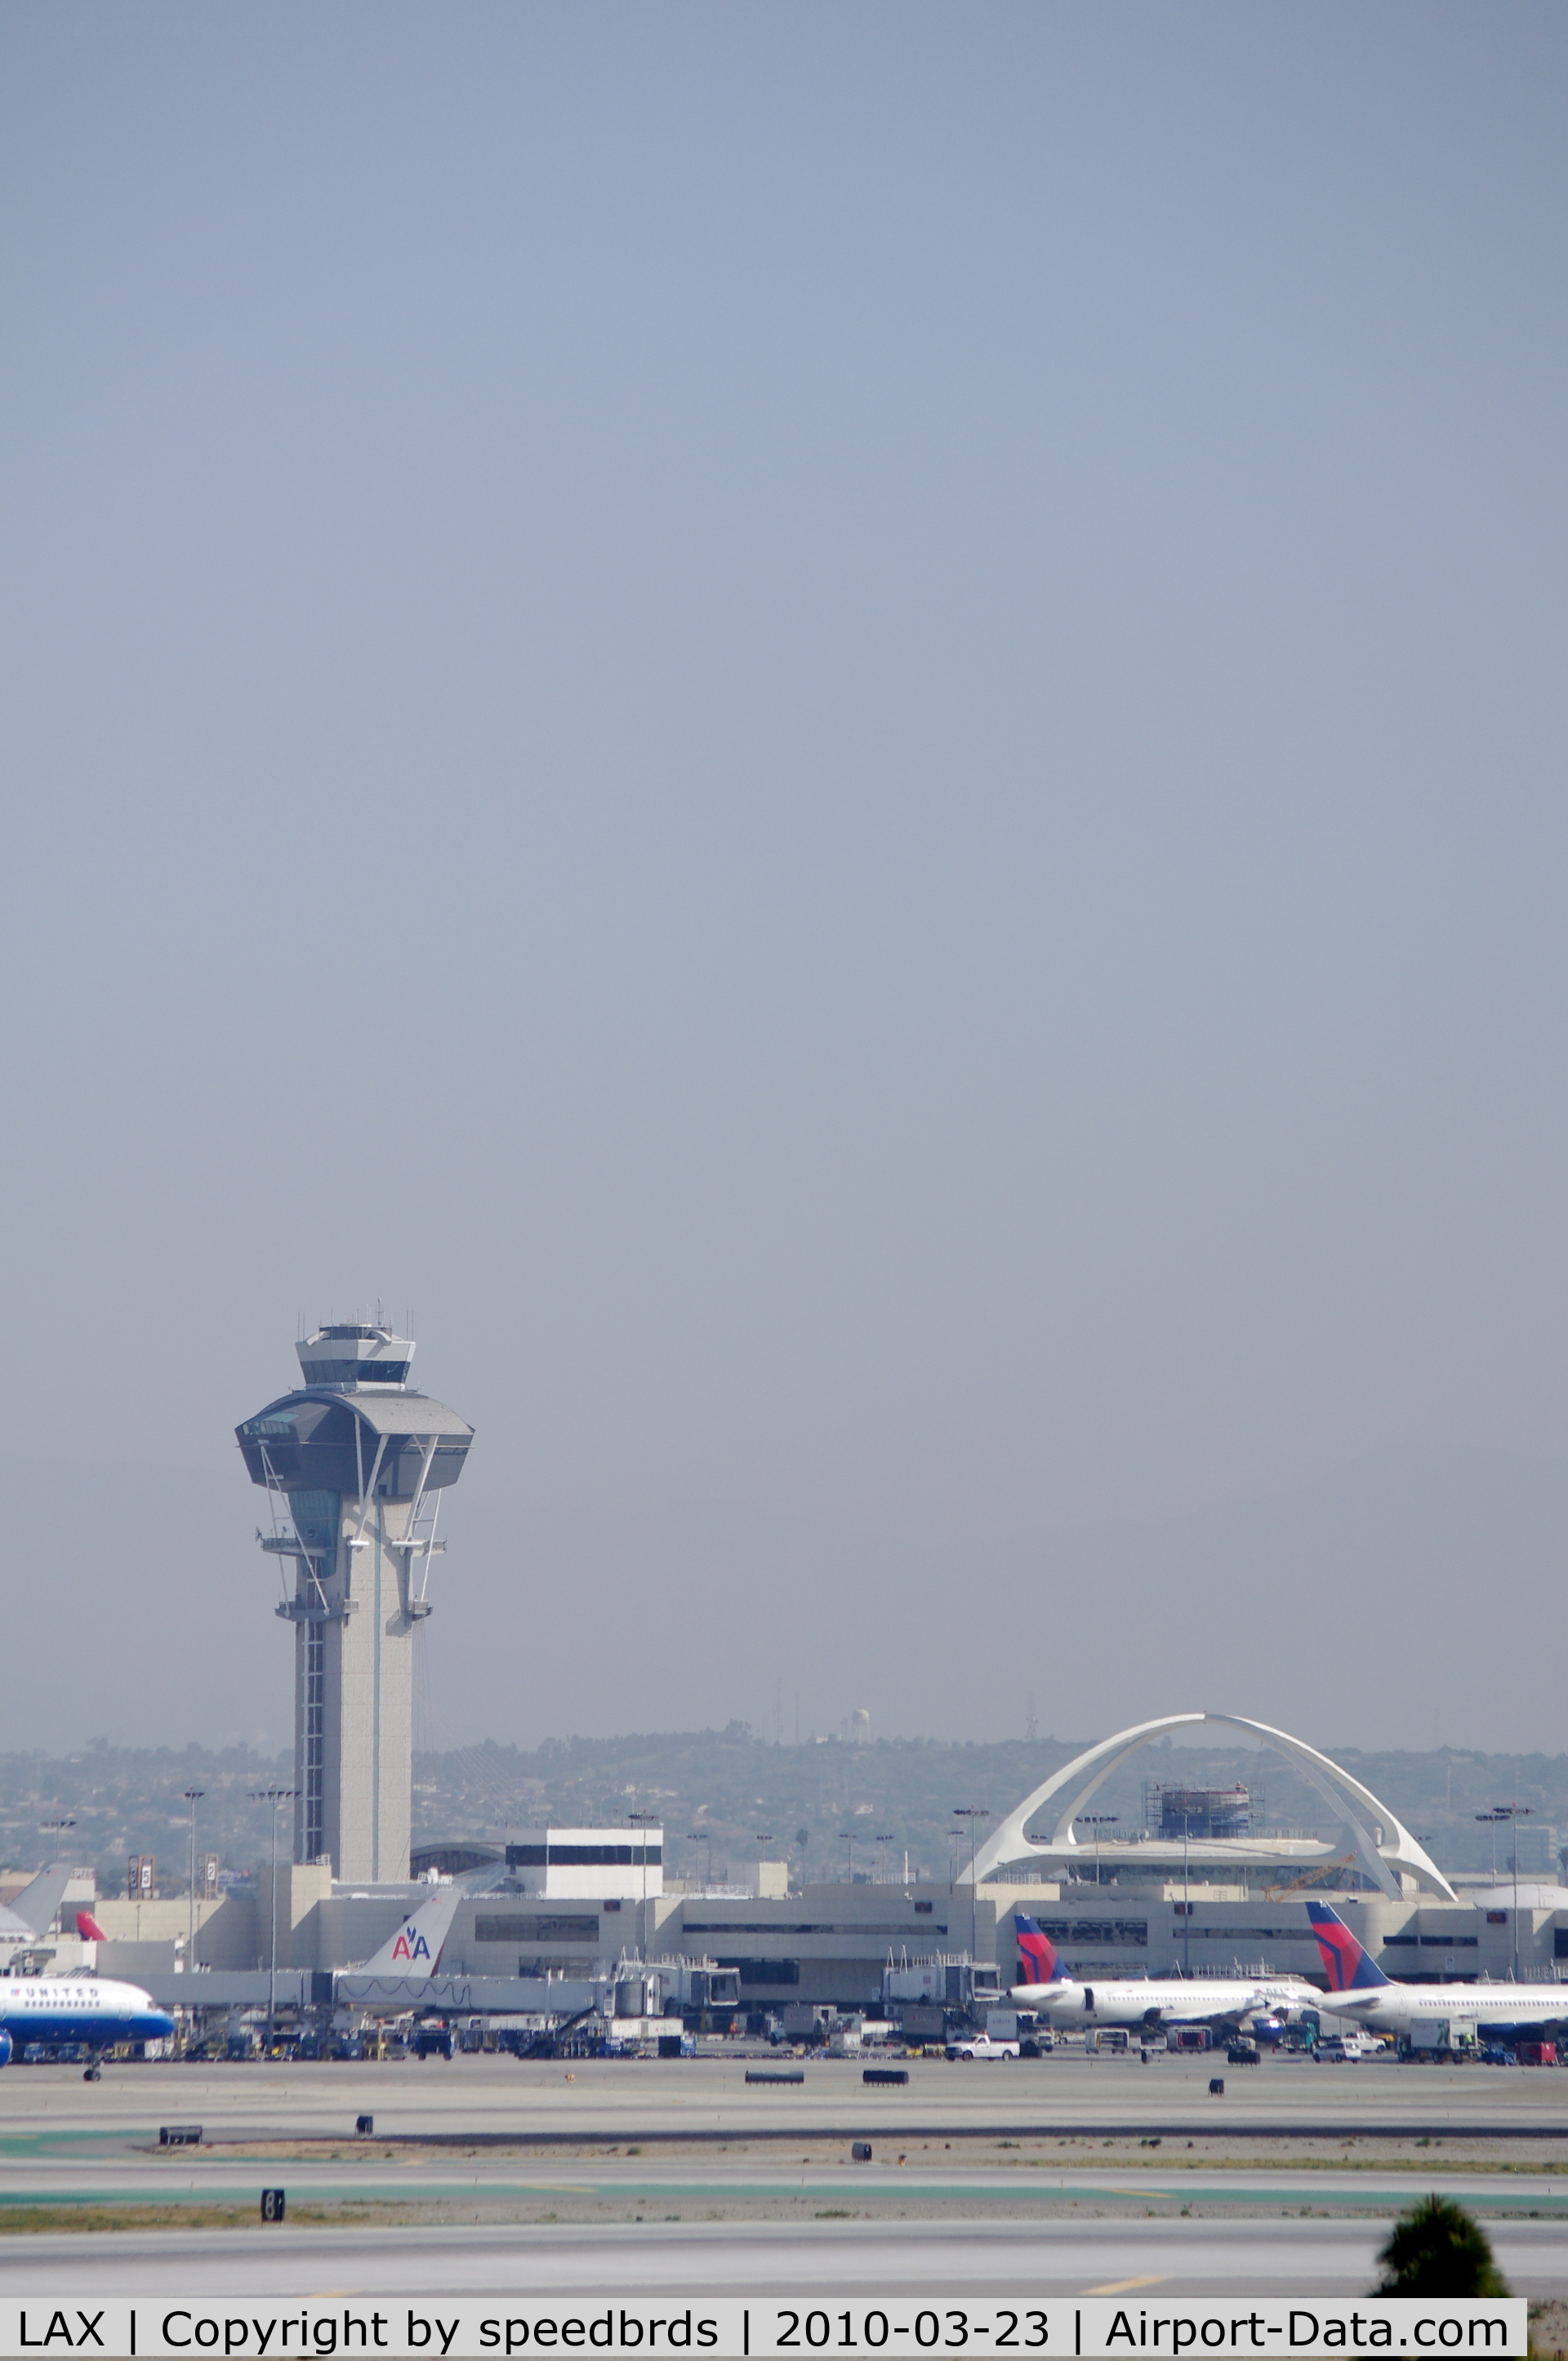 Los Angeles International Airport (LAX) - A beautiful March morning at LAX